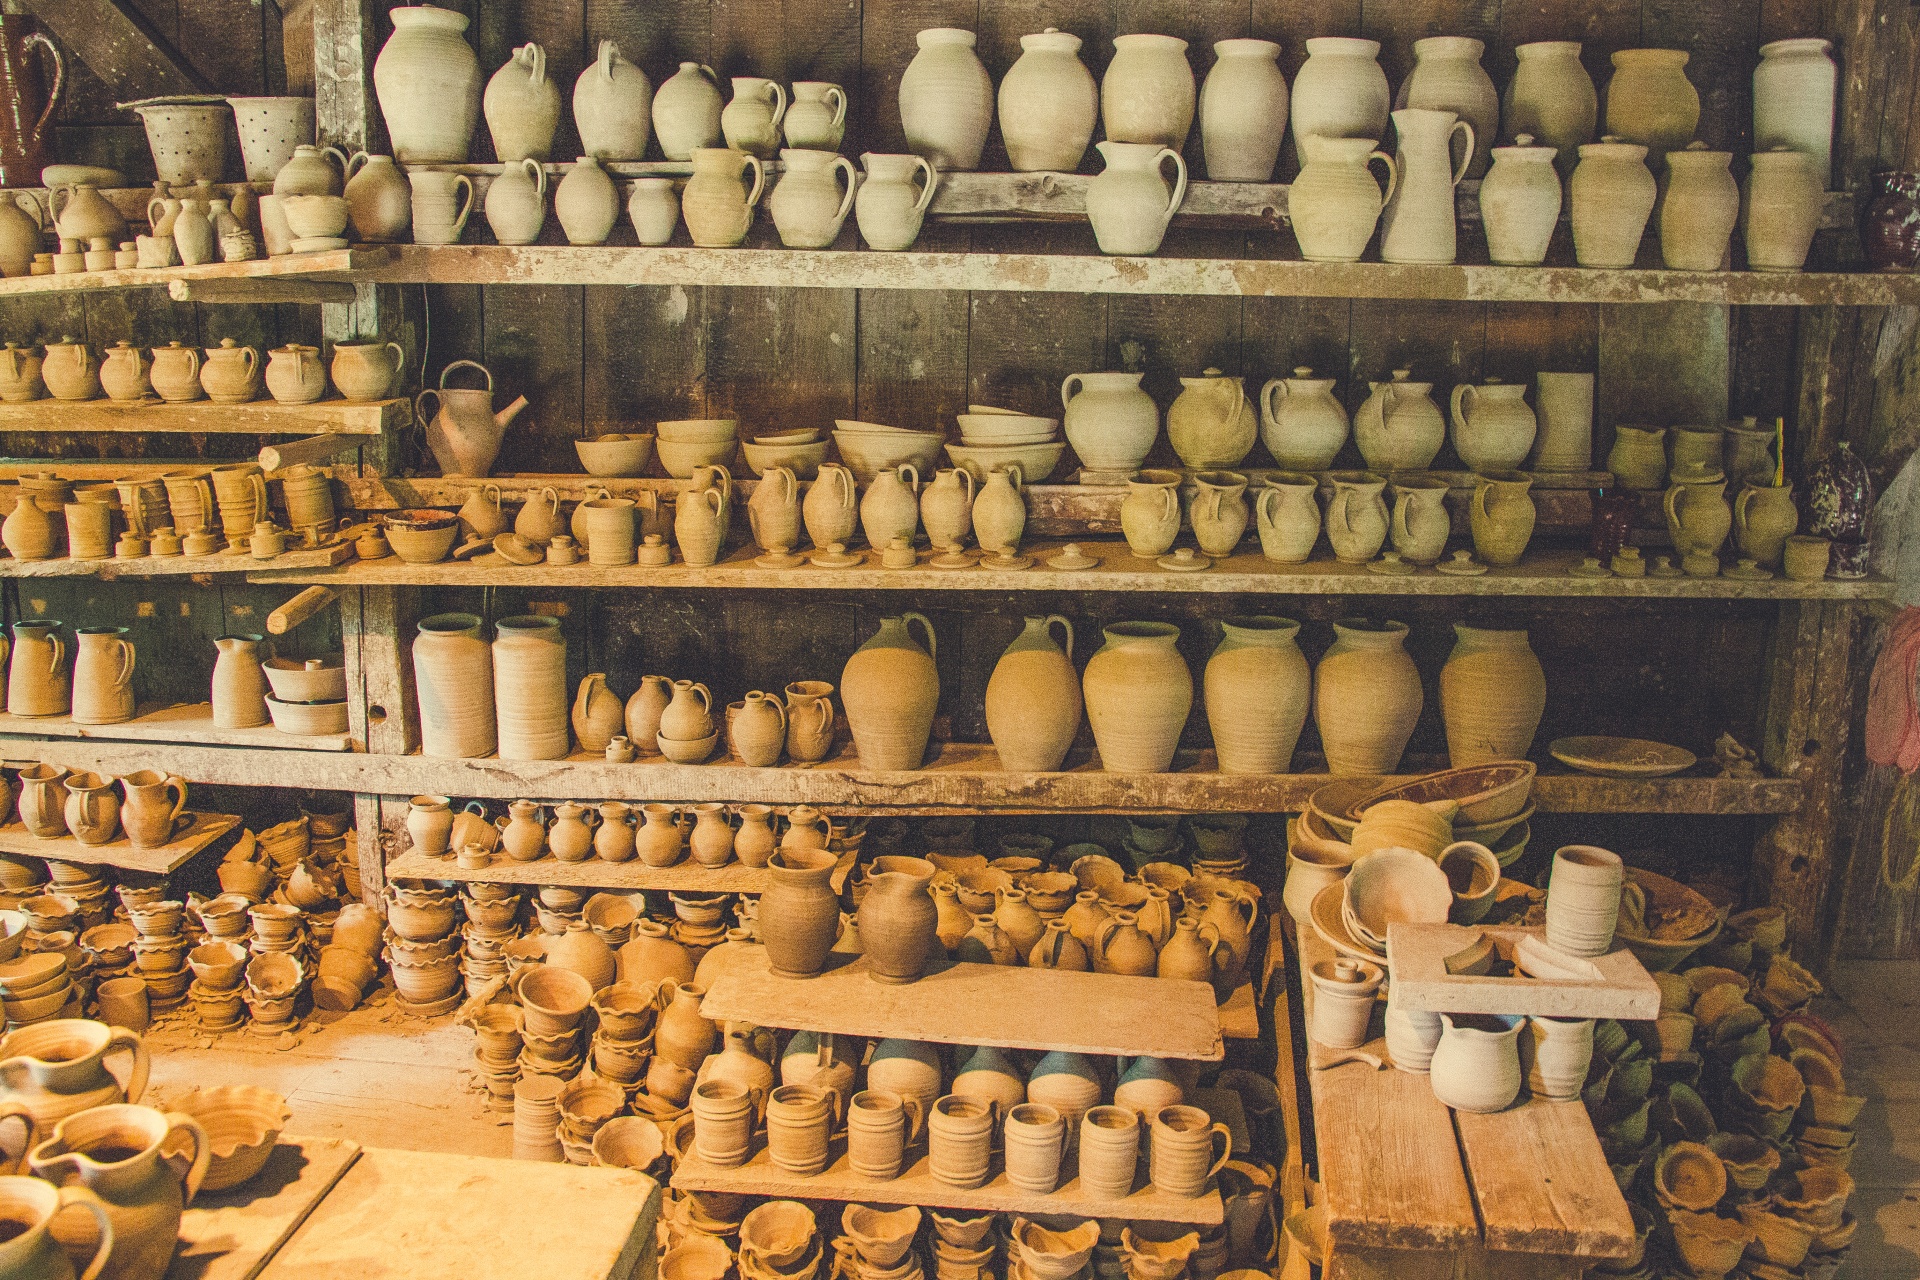 pottery-workshop-free-stock-photo-public-domain-pictures